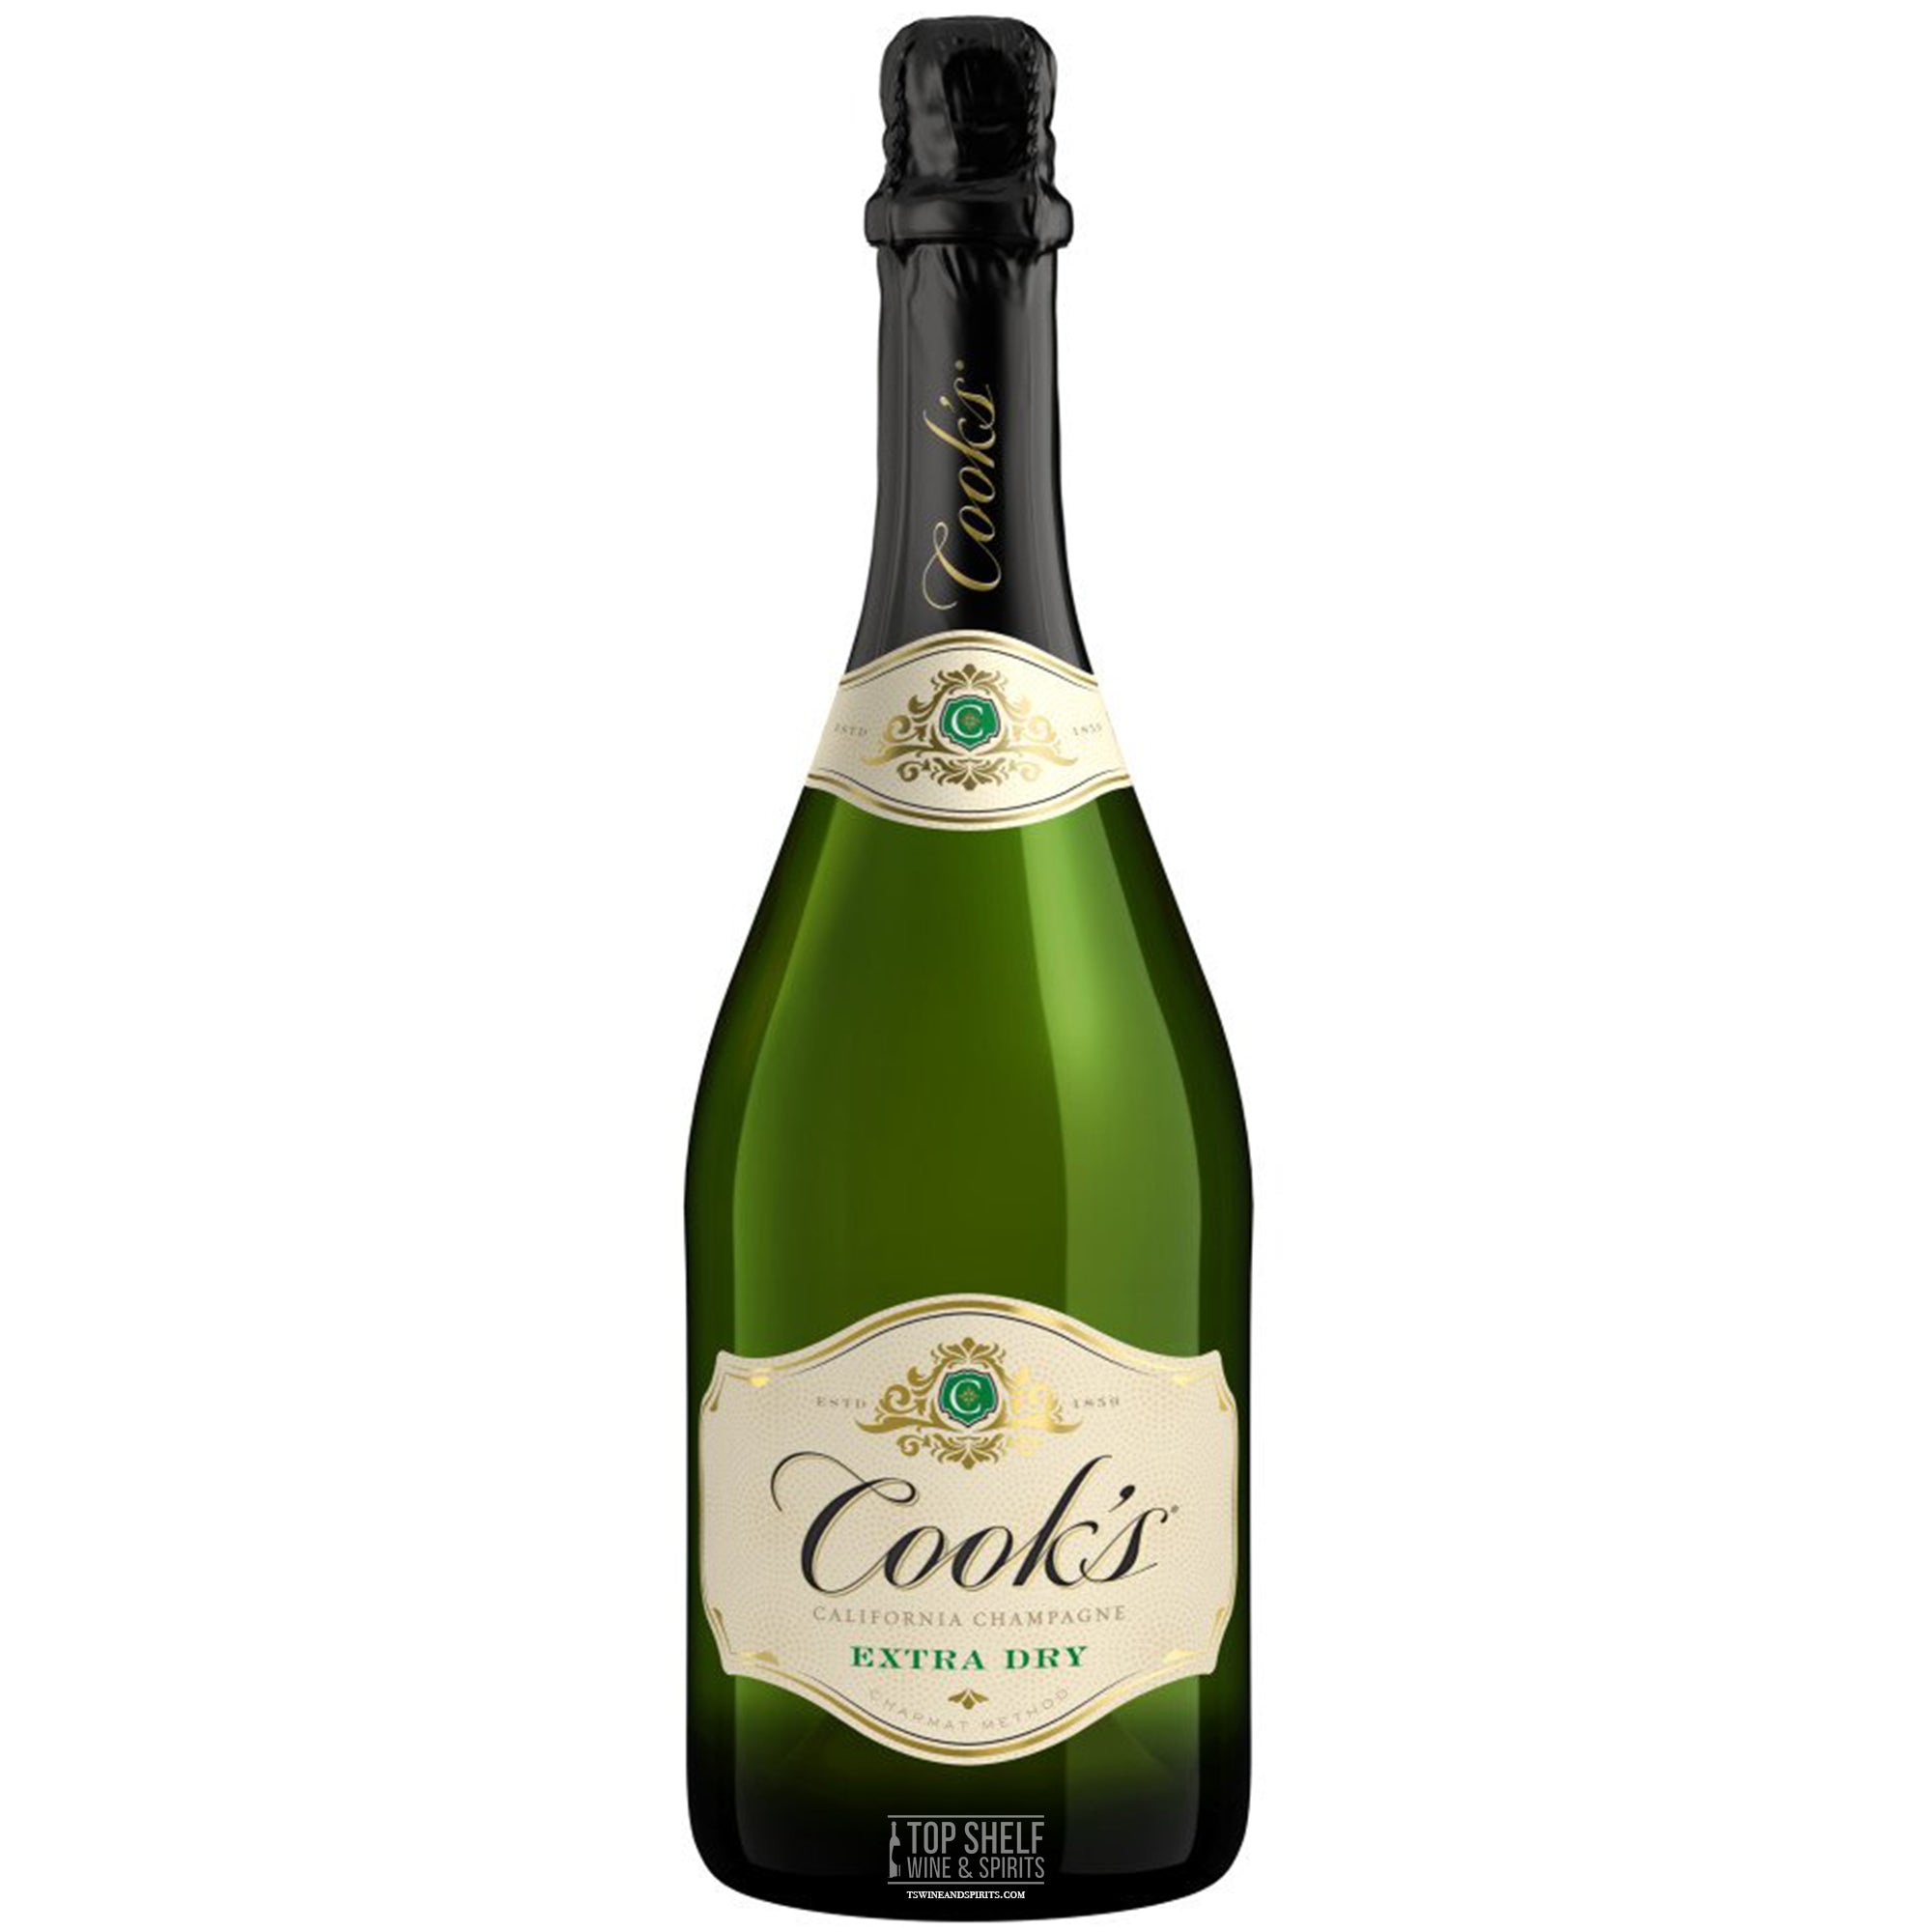 Cook’s California Champagne Extra Dry